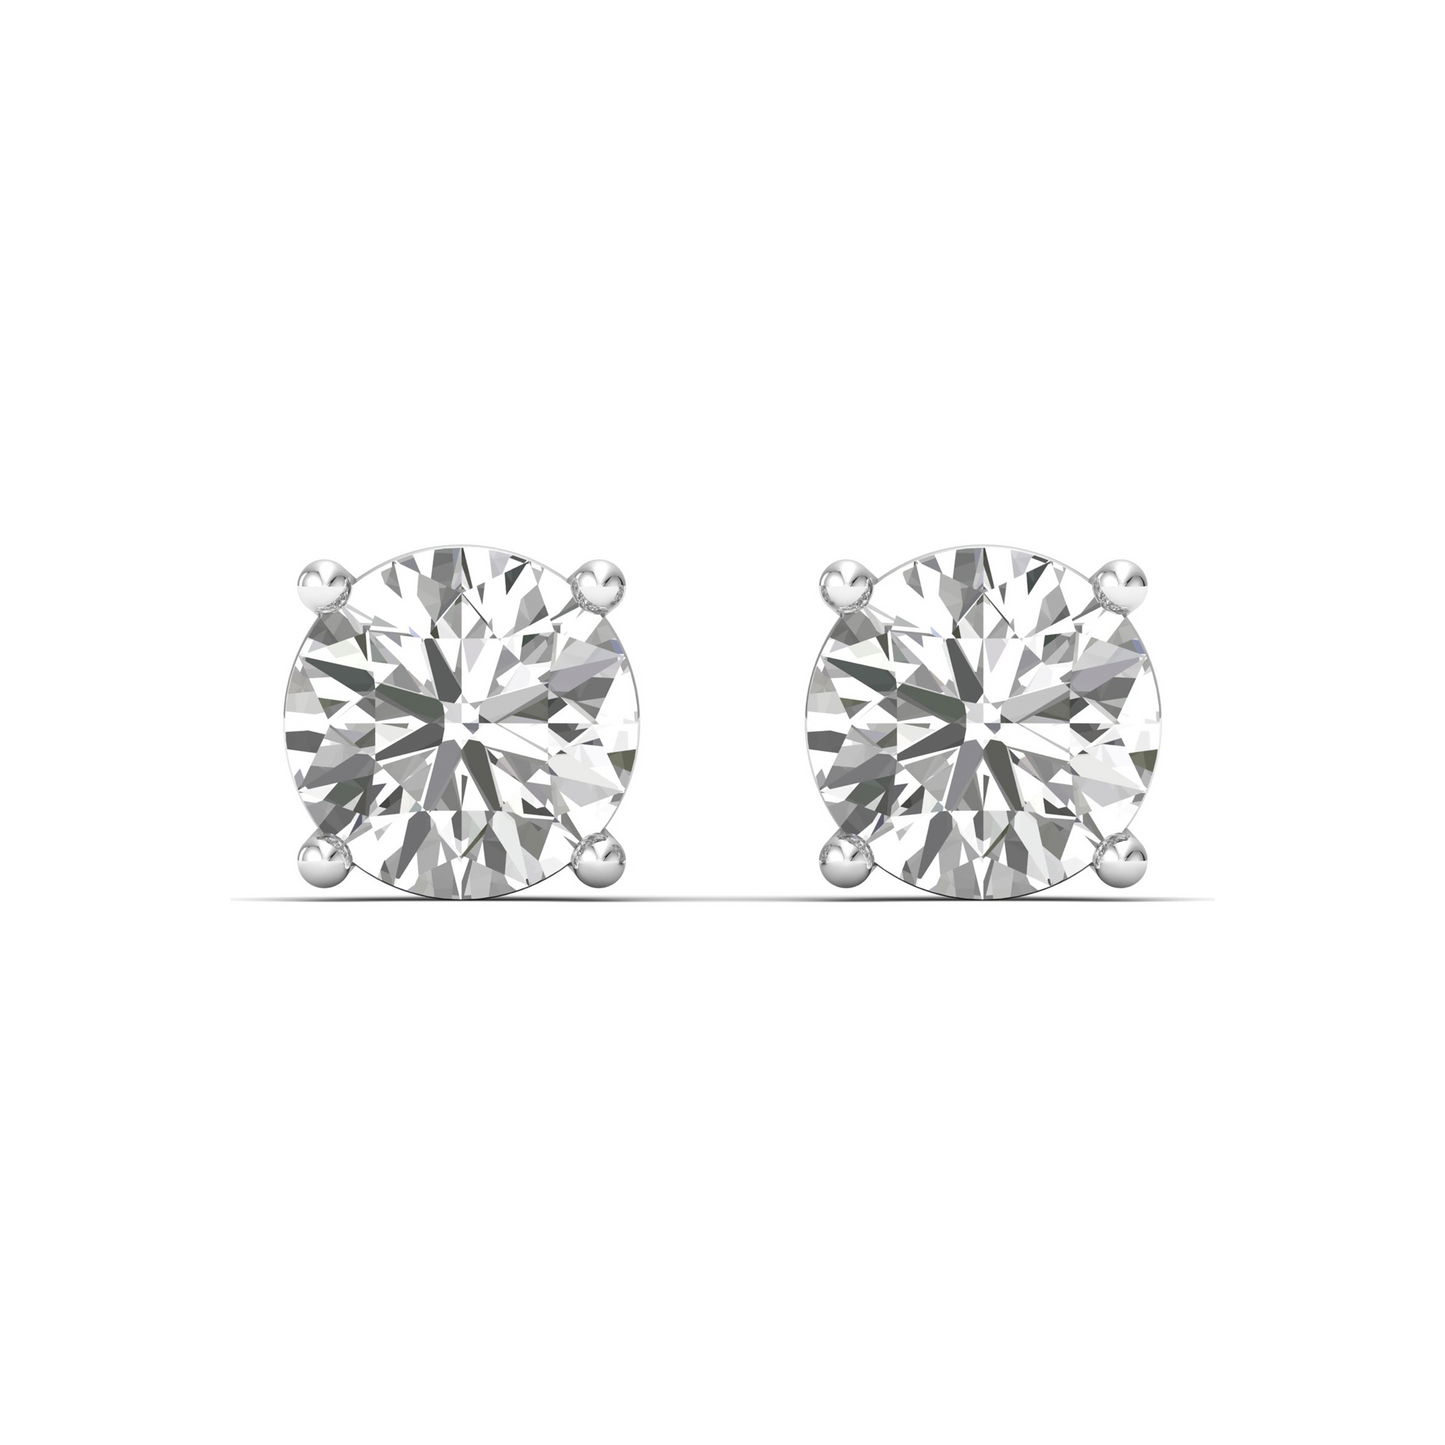 Radiant Brilliance: Round-Cut Diamond Earrings - The Epitome of Elegance